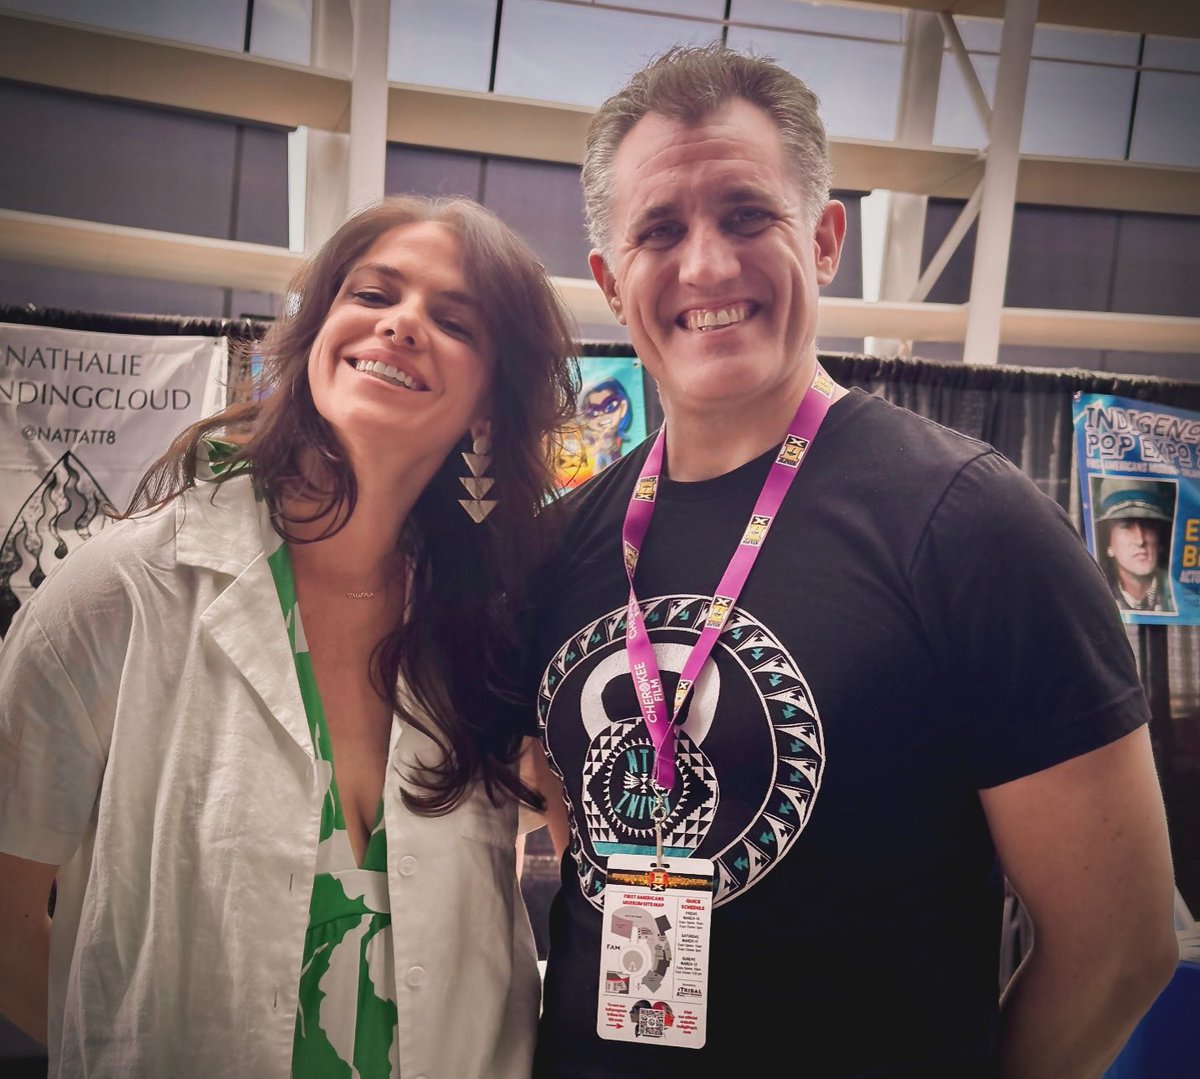 Here I am with Tanis ( #kaniehtiiohorn ) from #letterkenney #letterkennyproblems ! She was very nice and bought a lot of stuff from #literatipressok at #indigipopx2024 . It has been a great show!